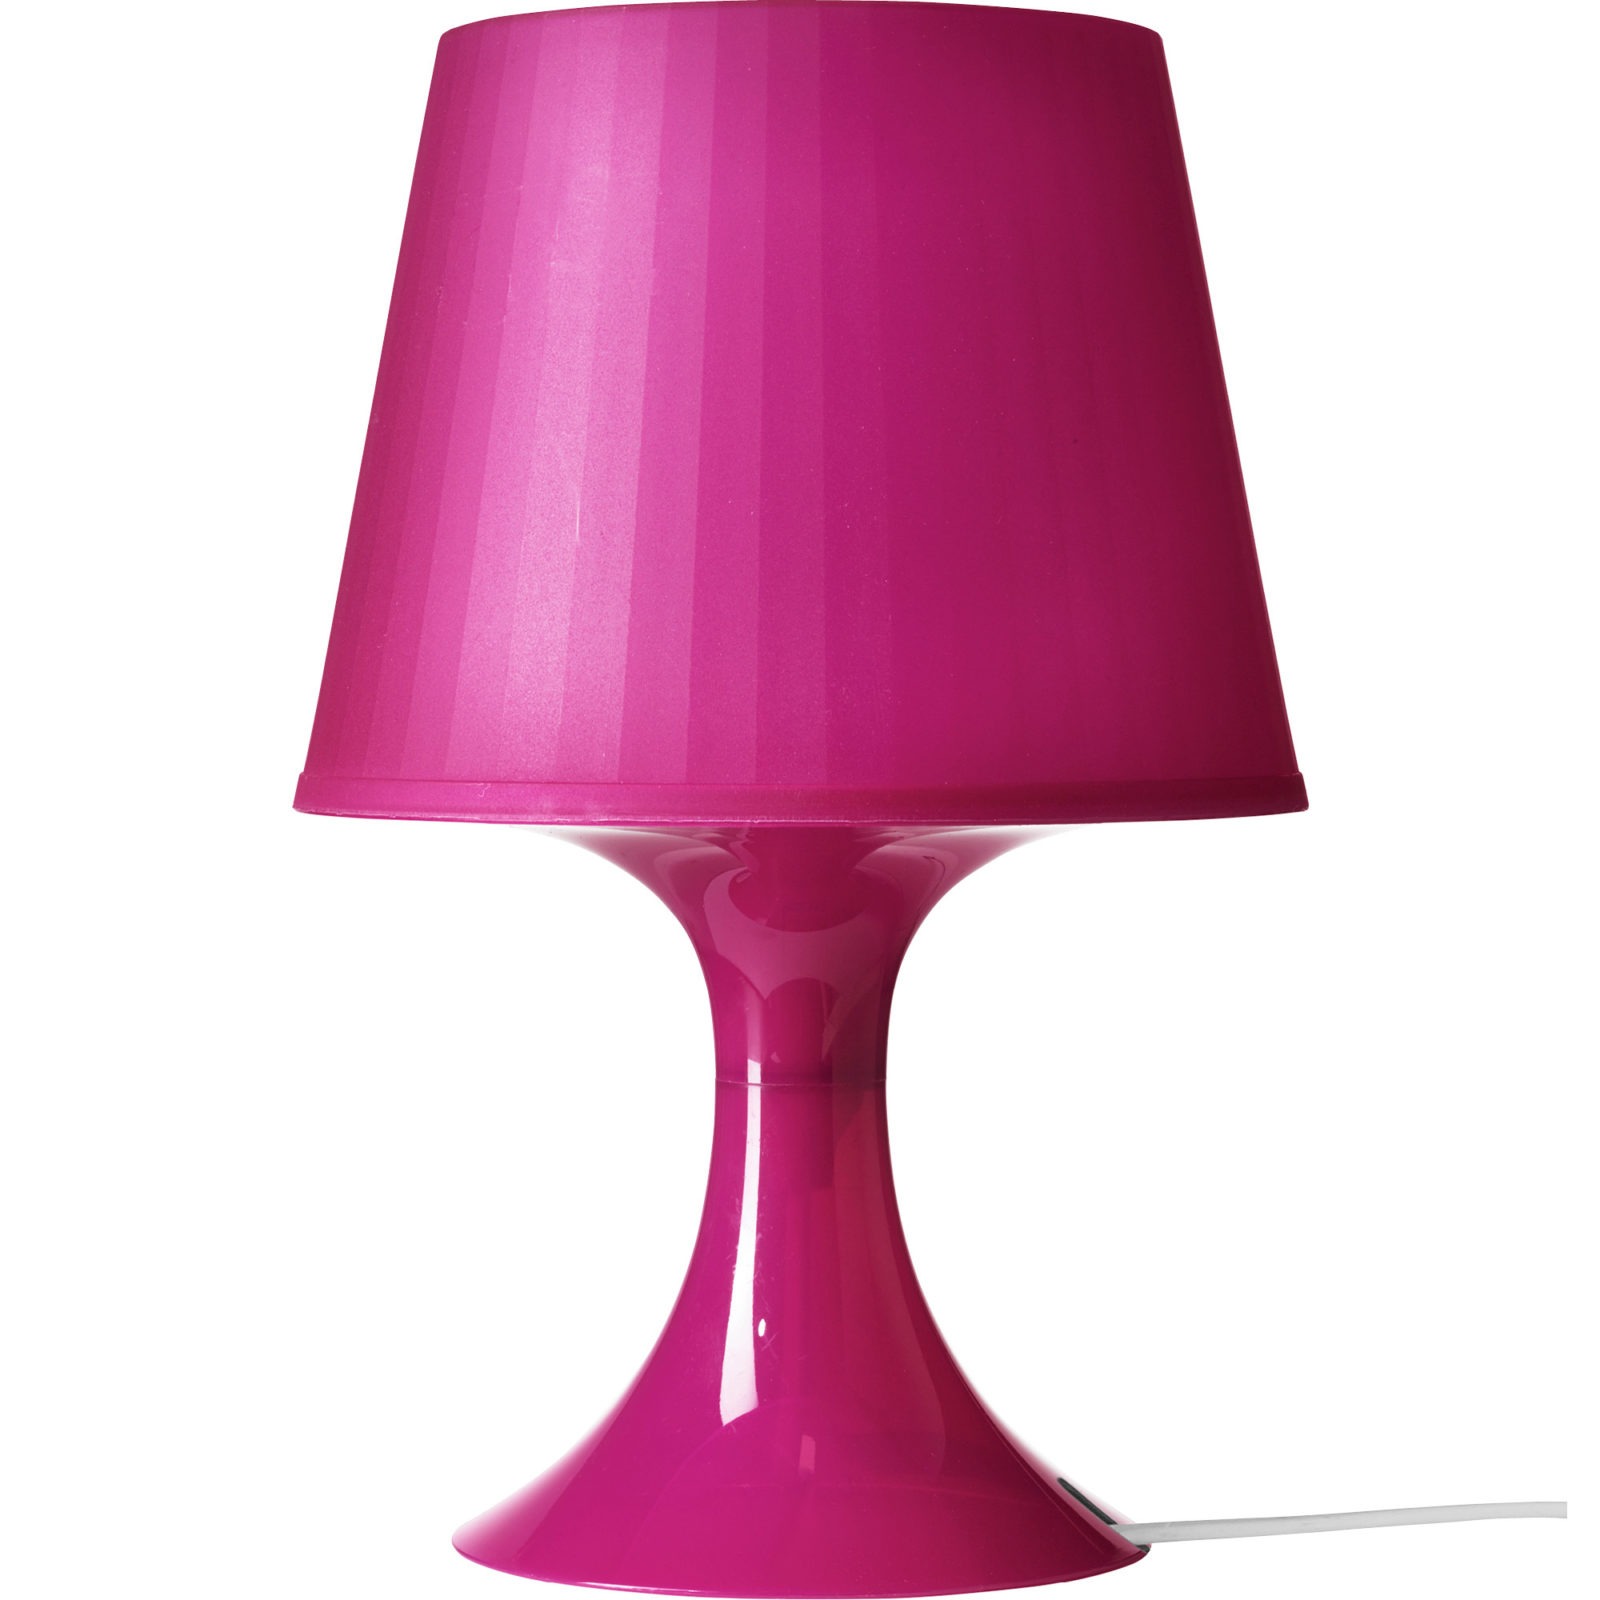 Bright pink plastic table lamp with white cord, LAMPAN.